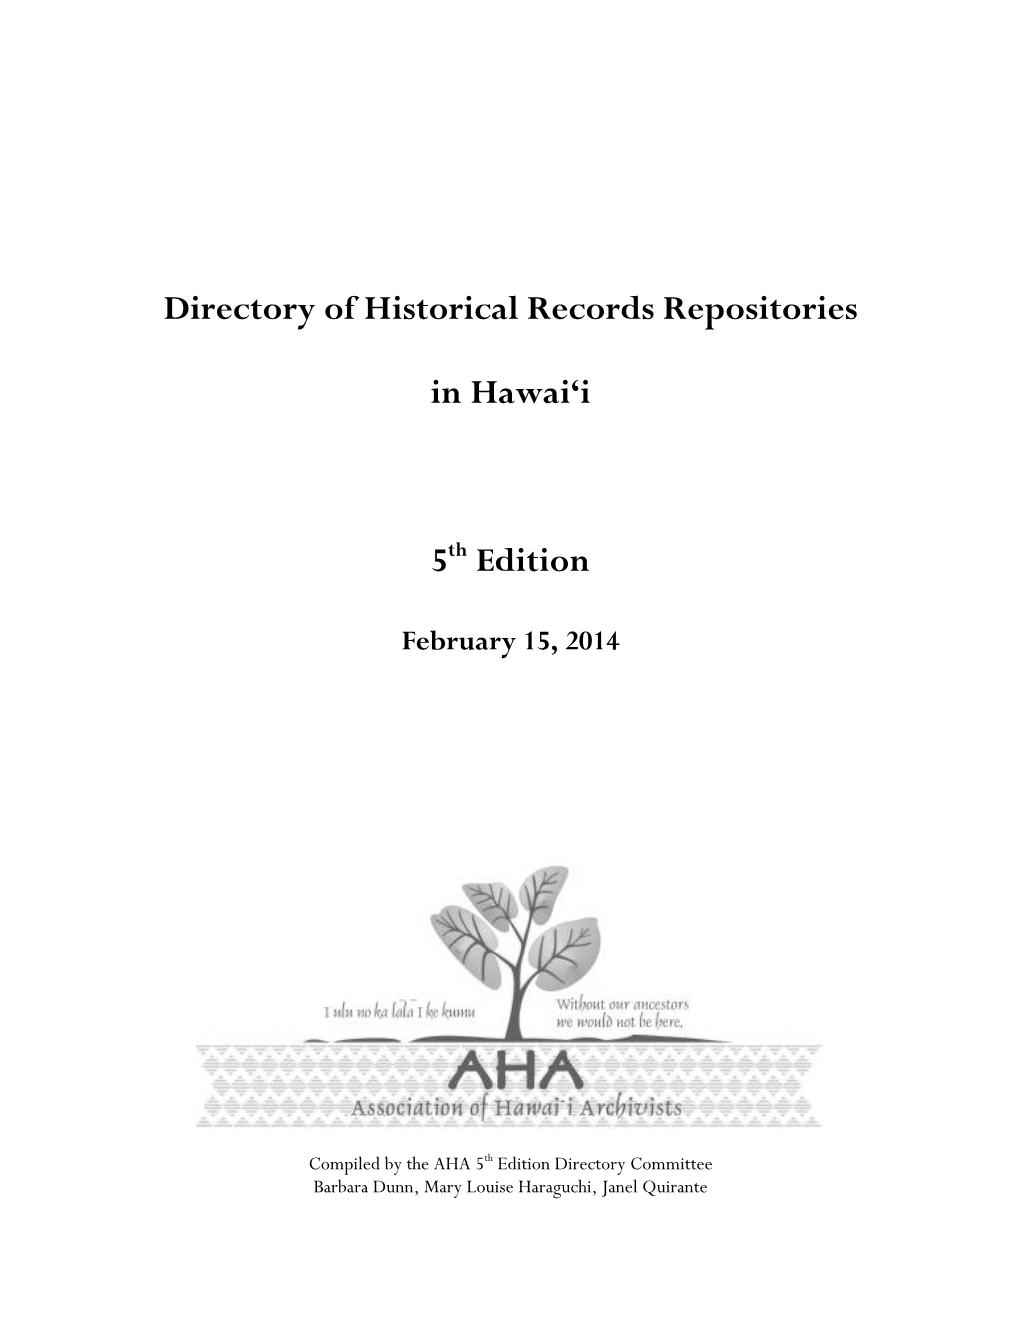 Directory of Historical Records Repositories in Hawai'i 5Th Edition